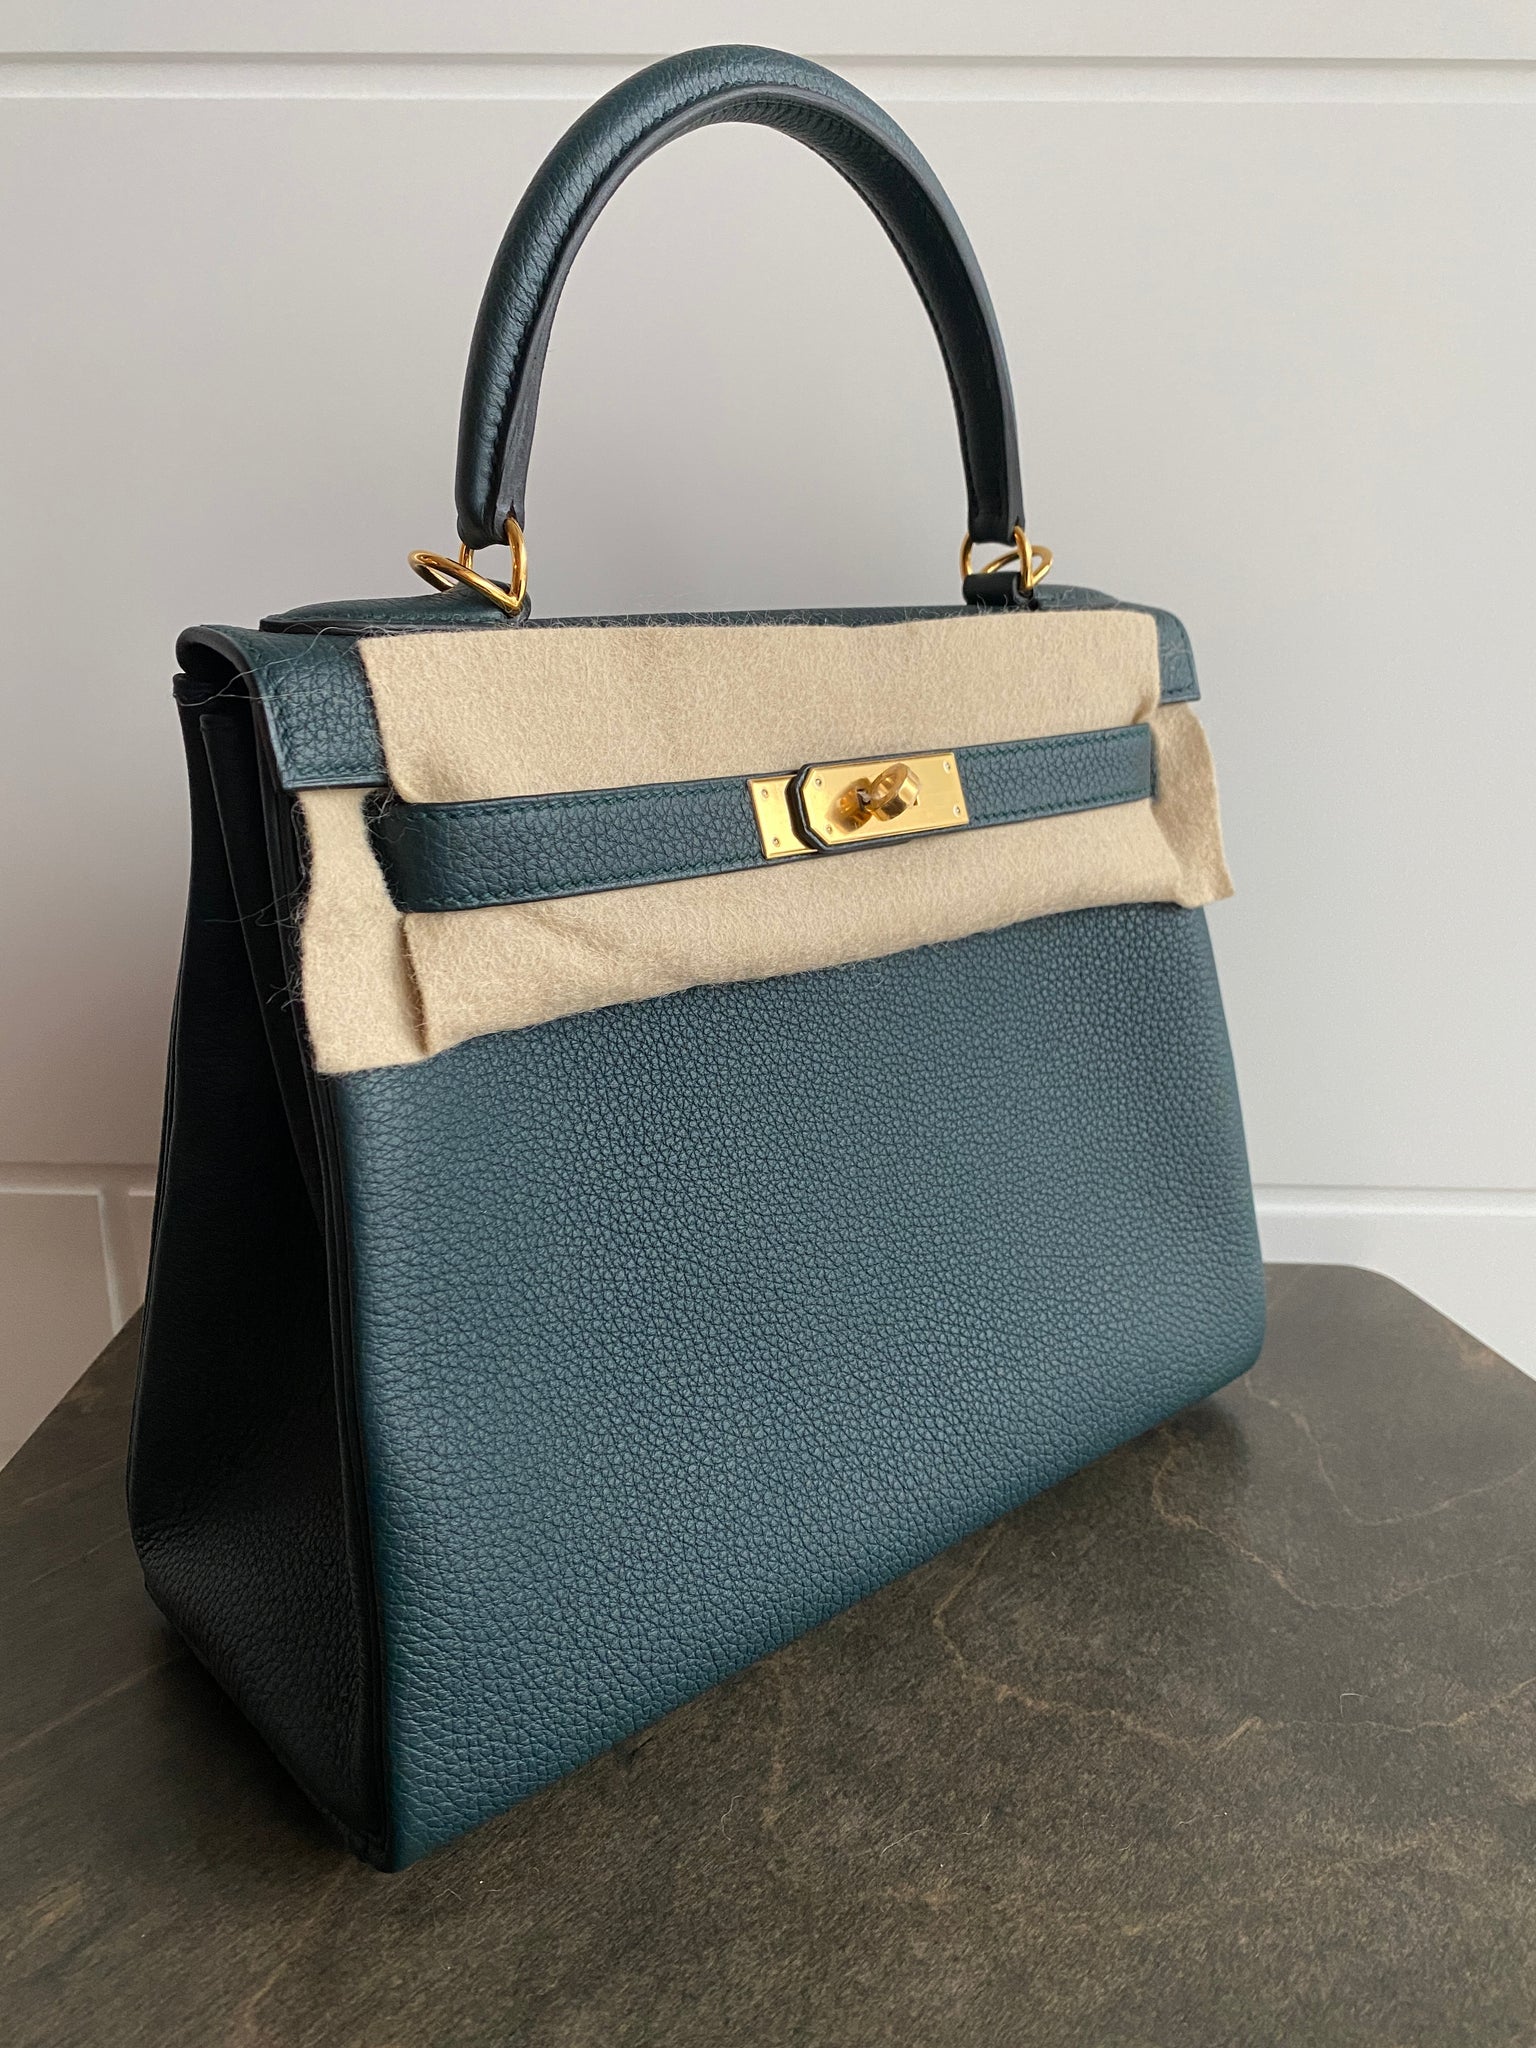 Hermes Kelly 28 Vert Cypress Togo With 